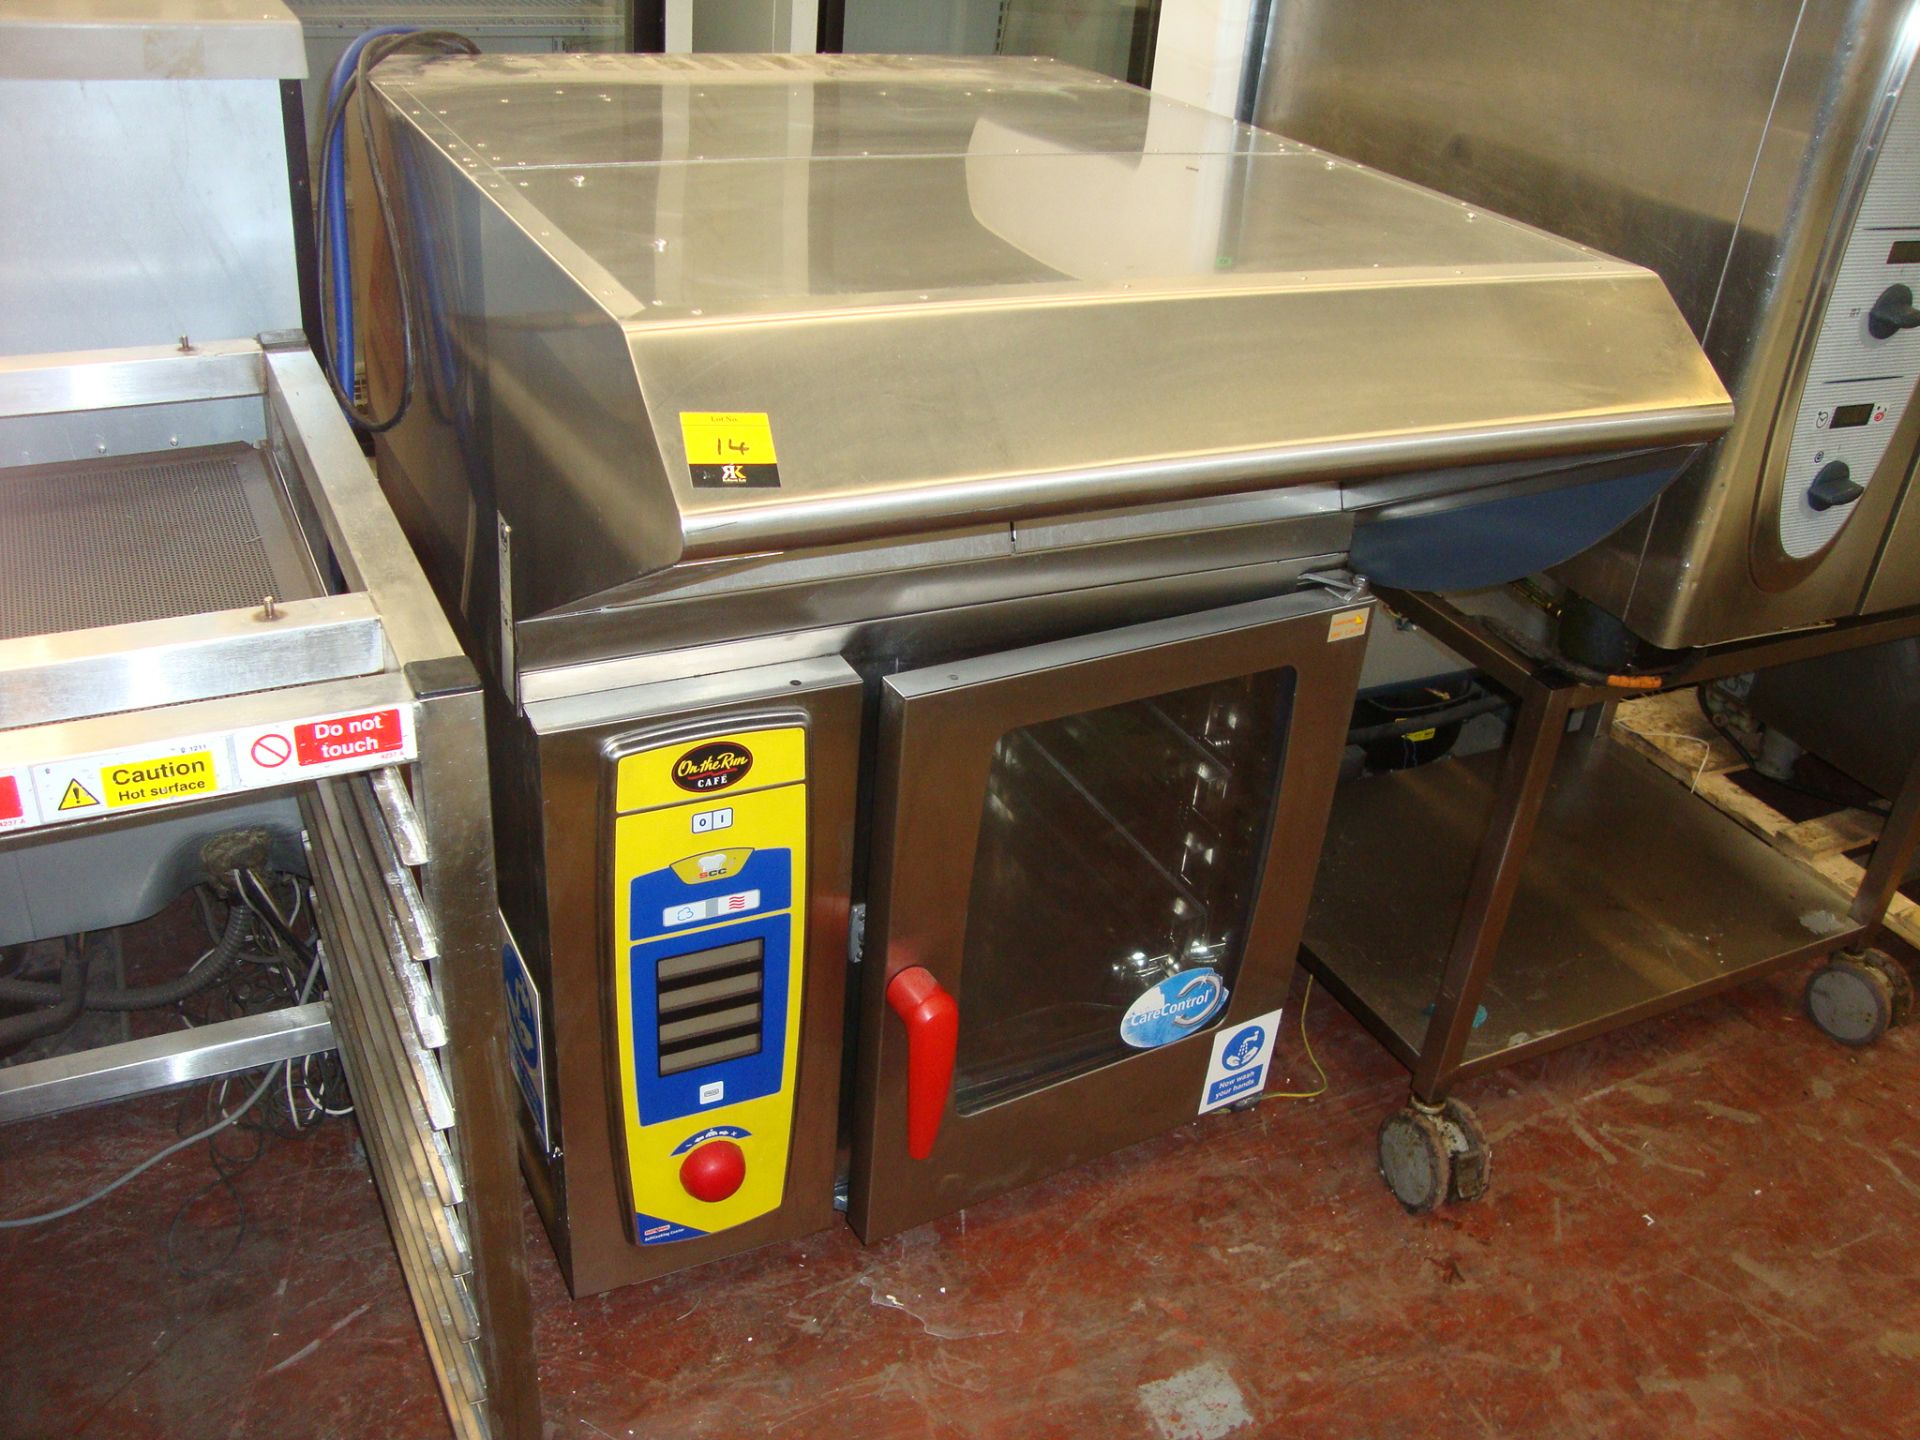 Rational model SCC61 stainless steel multifunction oven, plus stainless steel extractor hood model - Image 6 of 12